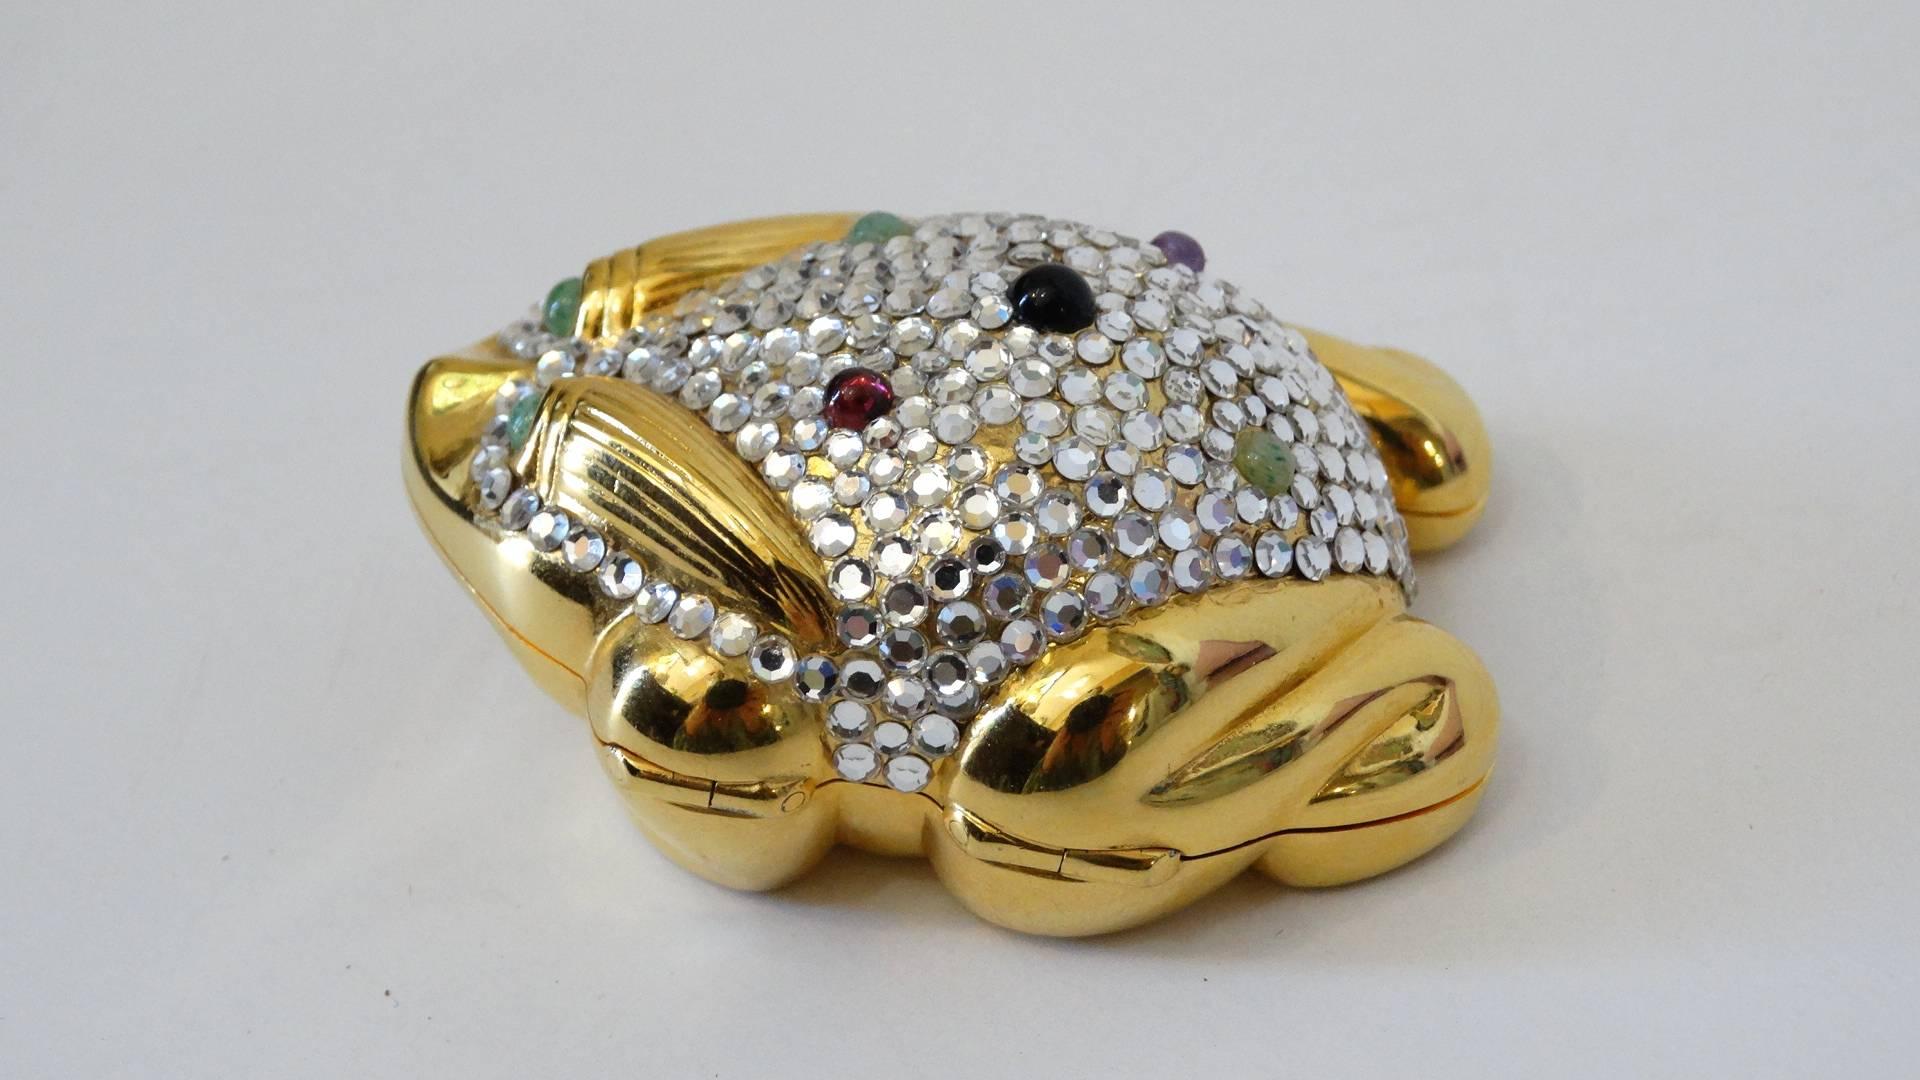 Rare 1984 Judith Leiber frog Pillbox with multi color Jade, Amethyst and Onyx stones with a push-lock closure.  Gold Plated hardware encrusted with Austrian Swarovski Crystals. Judith Leiber Signature inside Circa 1984. 

 0.9